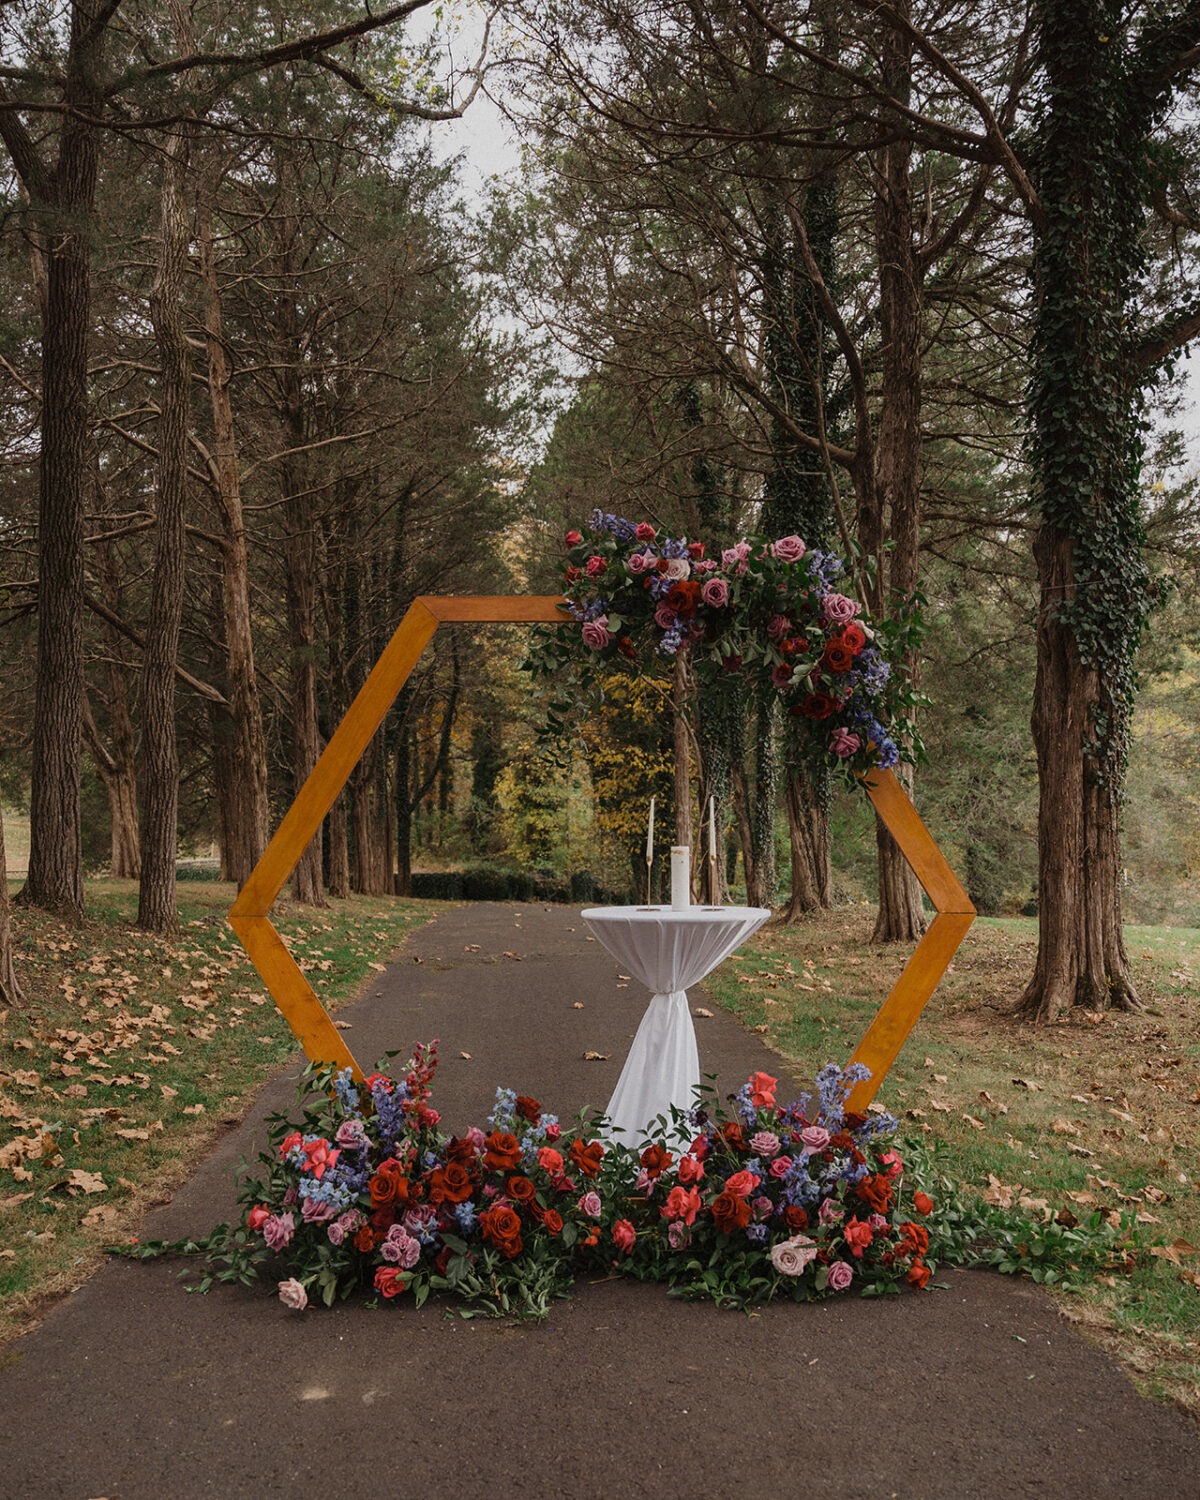 floral decor on arch at wedding ceremony